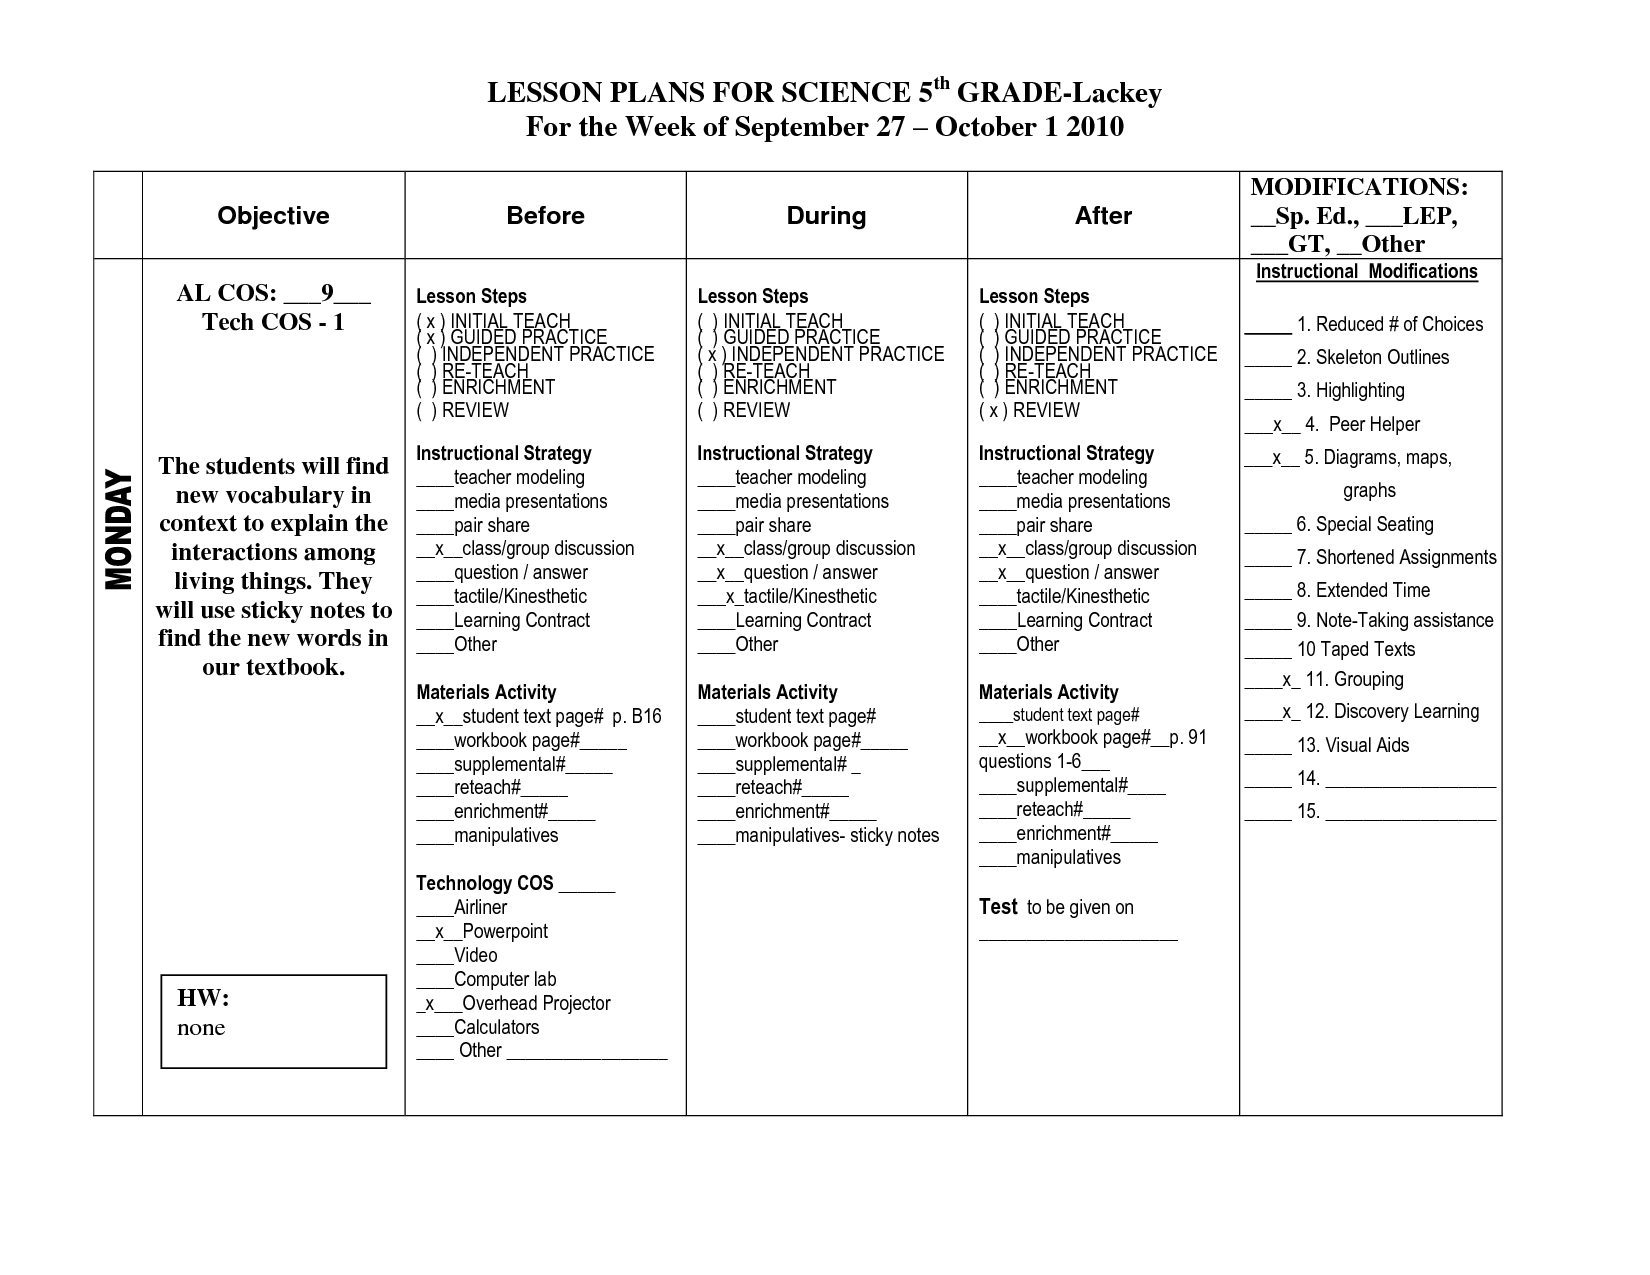 5th Grade Science Lesson Plans Image